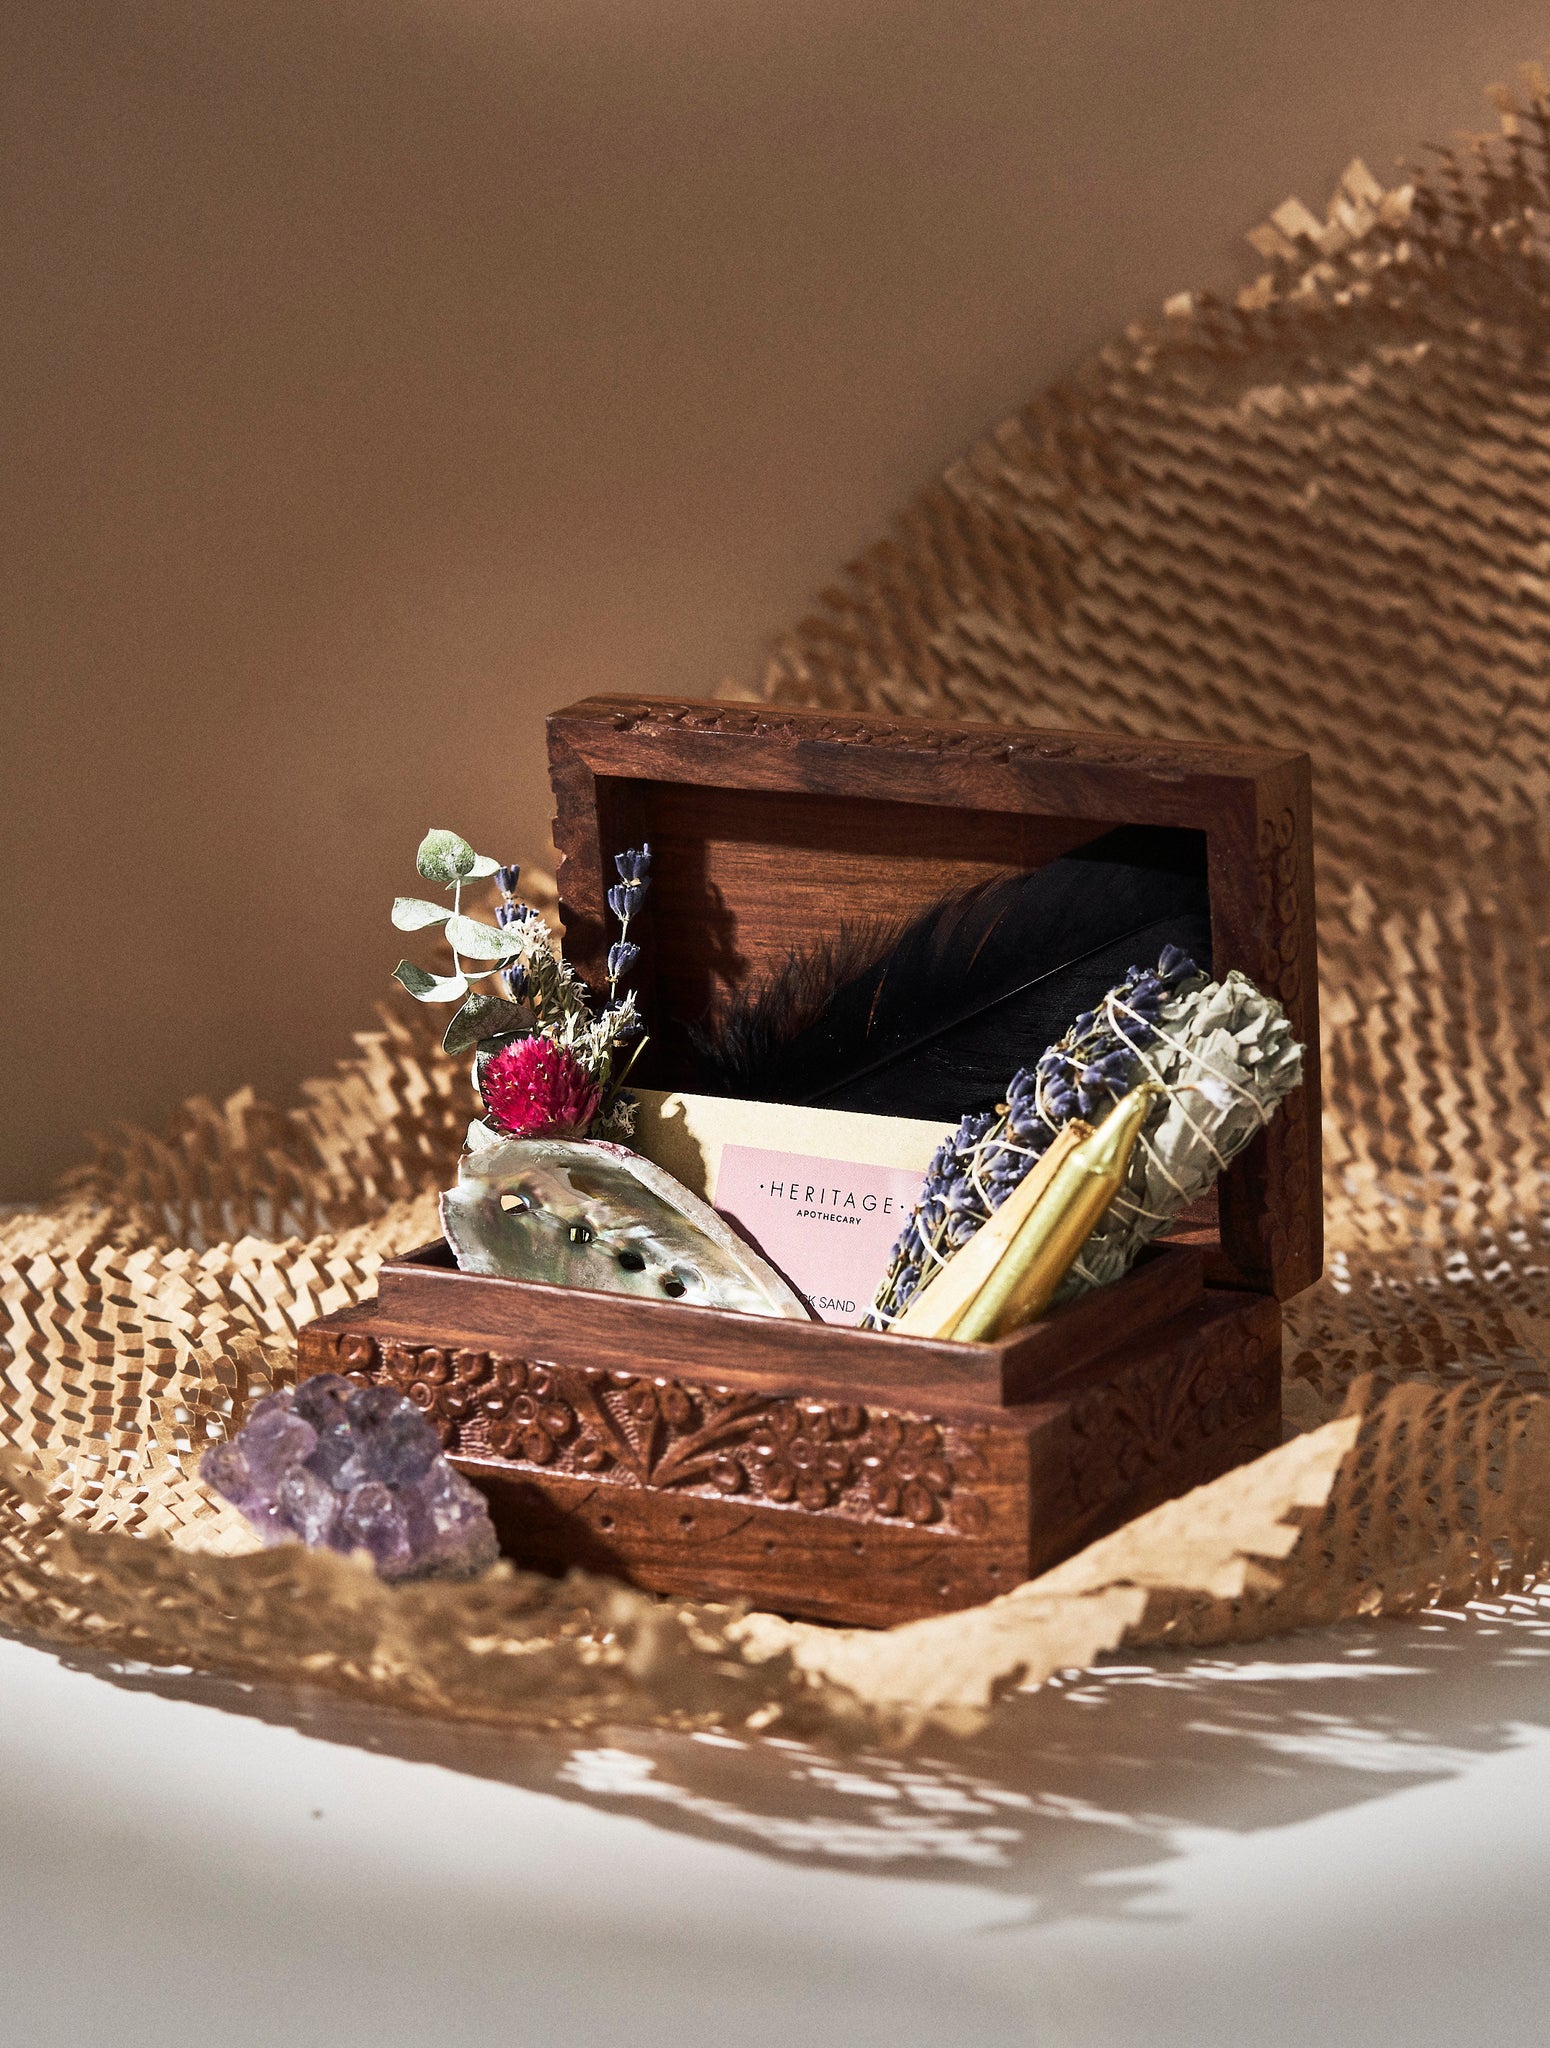 Elevate Your Space with the Heritage Apothecary Signature Smoke Cleansing Kit - Sage, Palo Santo, Amethyst, and More!